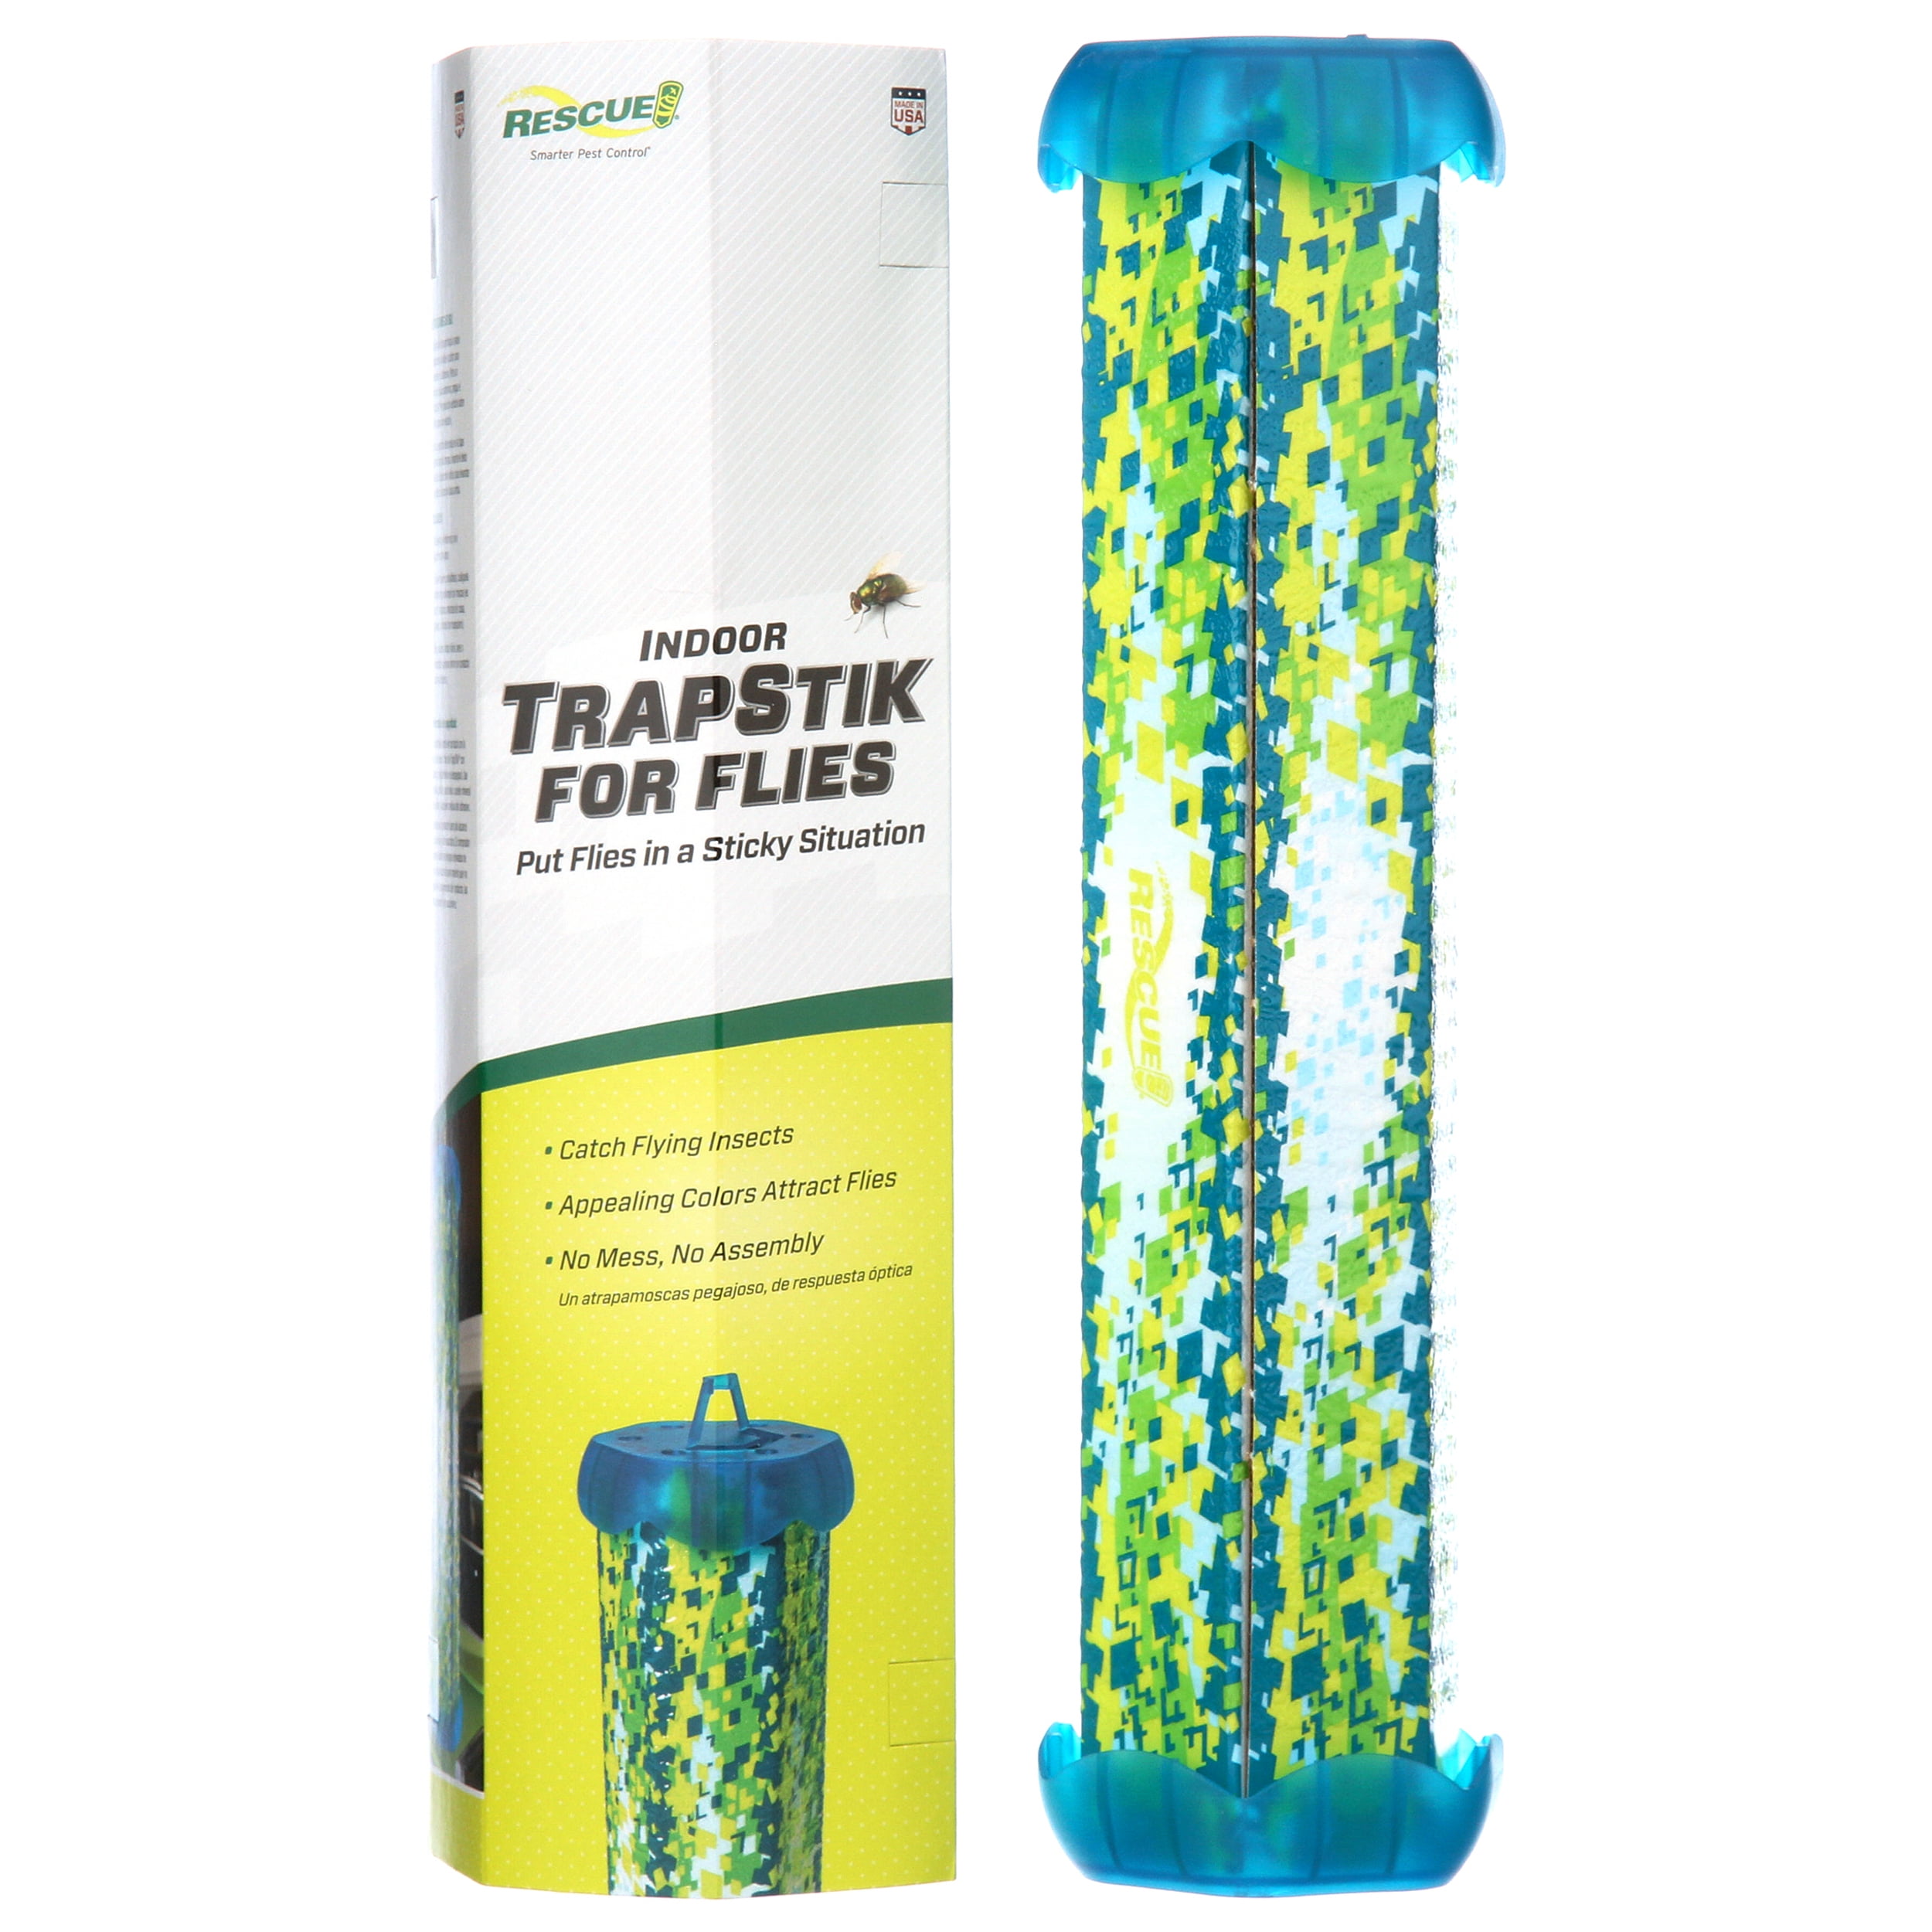 RESCUE! Trapstik Fly Trap, for Indoor Use, 1 Pack